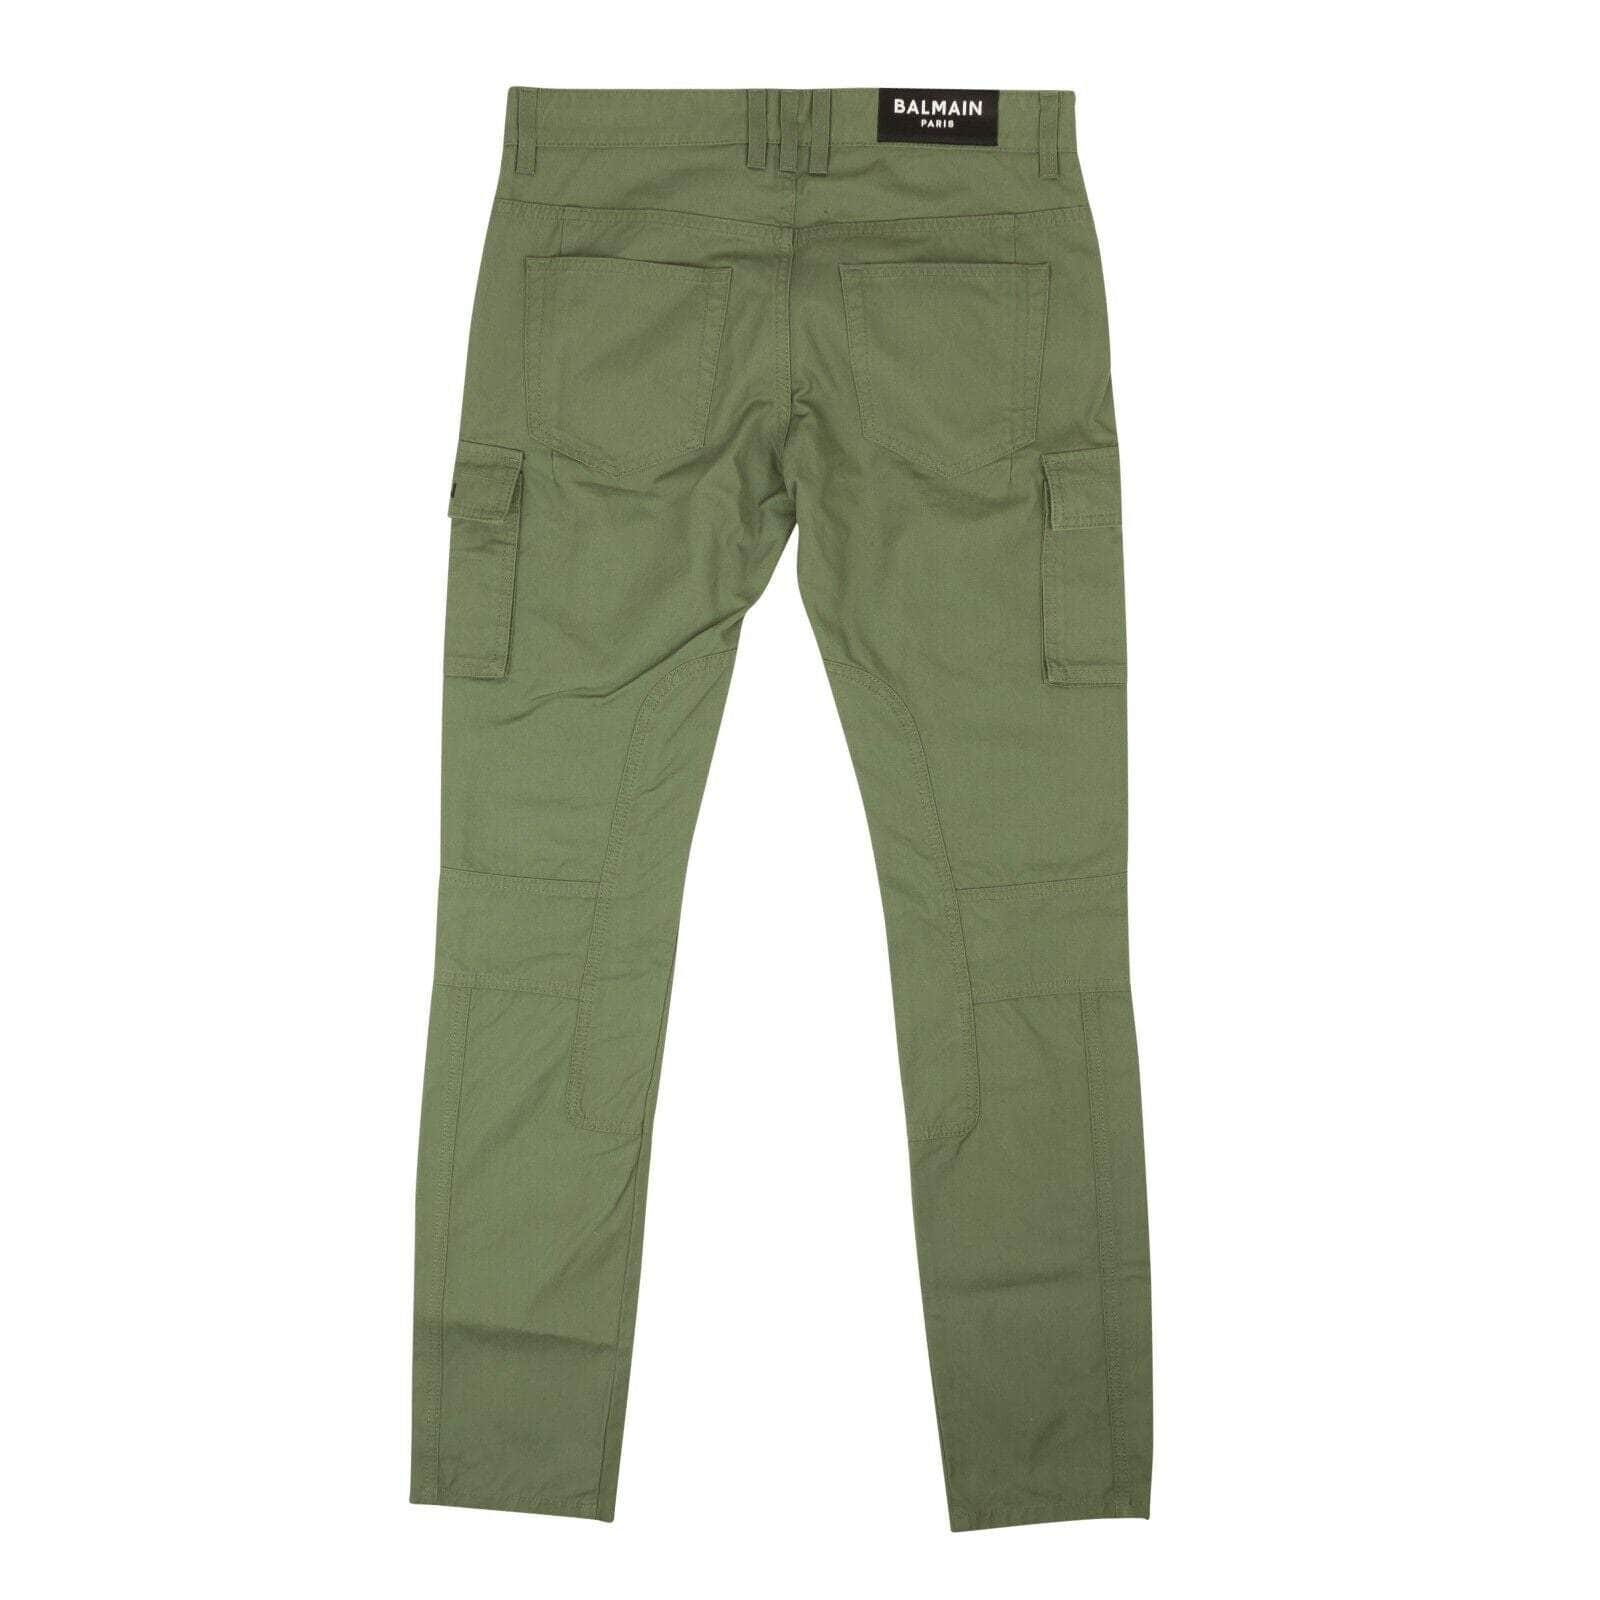 Balmain 1000-2000, channelenable-all, chicmi, couponcollection, gender-mens, main-clothing, mens-cargo-pants, mens-shoes, size-30 30 Green Khaki Slim Cut Ridged Cotton Cargo Jeans 95-BLM-1004/30 95-BLM-1004/30